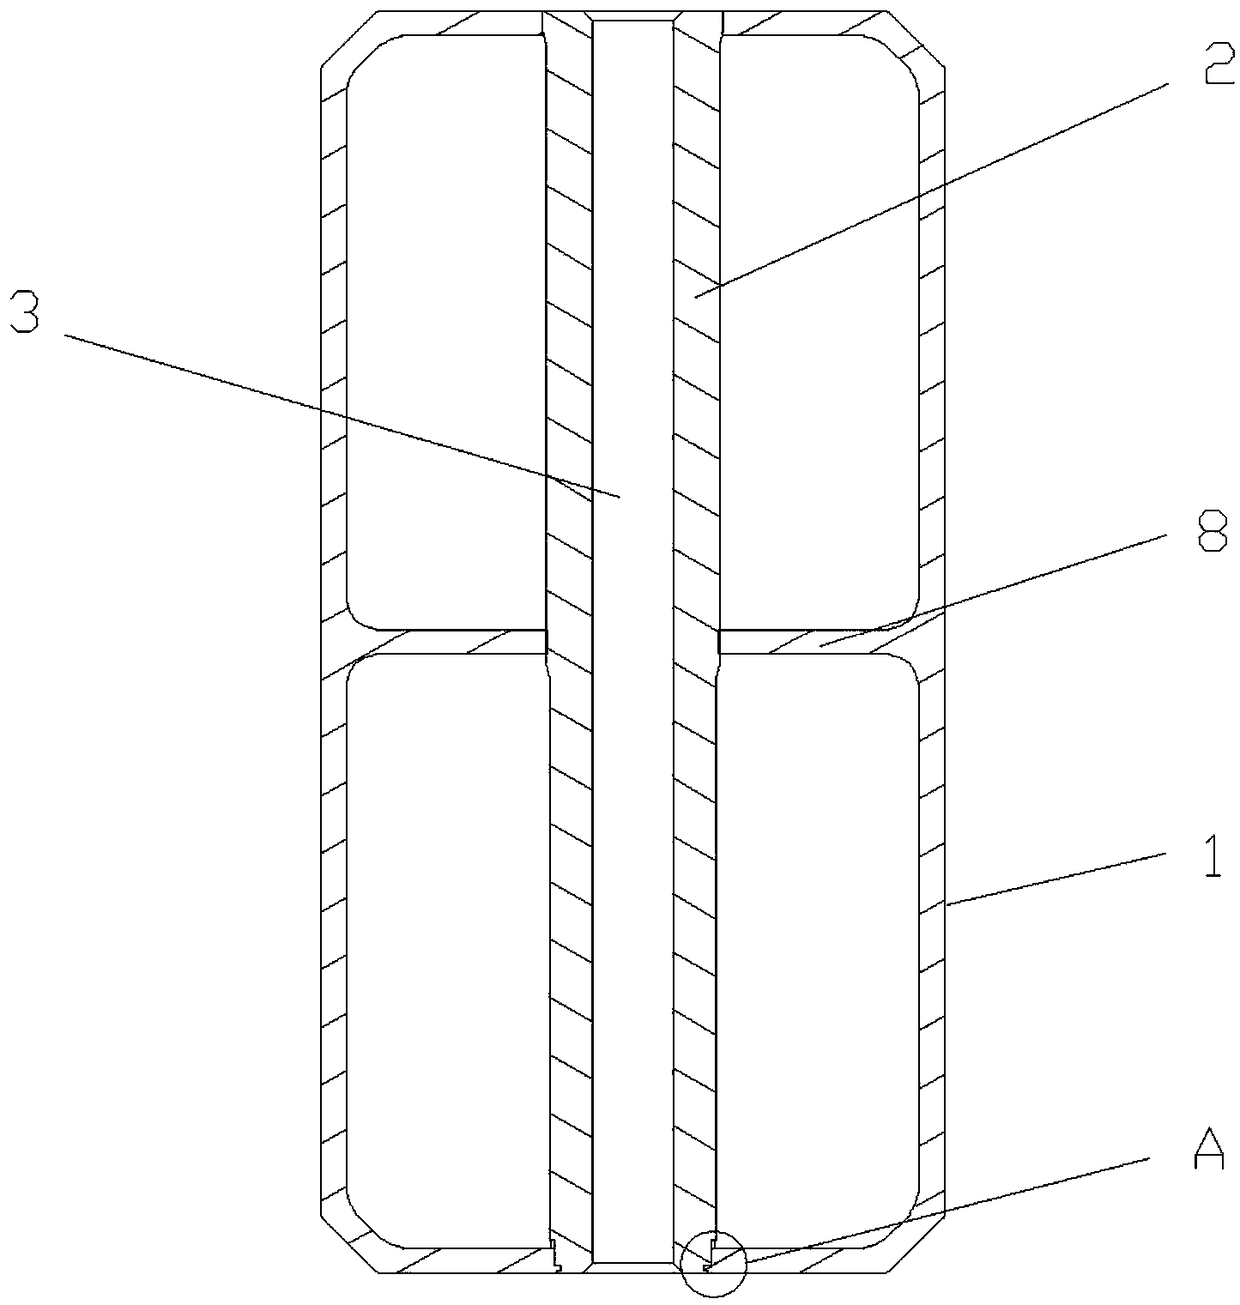 Body longitudinal beam and auxiliary frame mounting structure